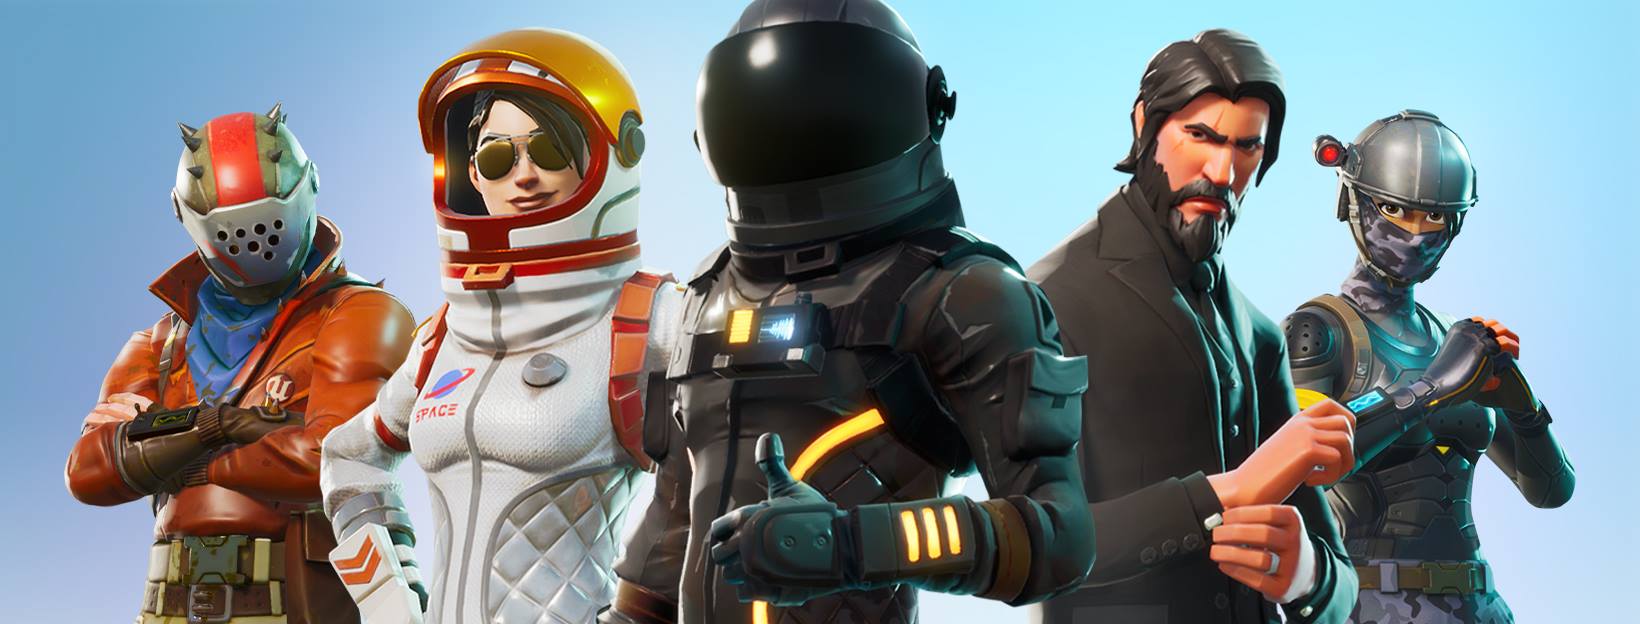 List of Android and iOS devices compatible with Fortnite ... - 1640 x 624 jpeg 110kB